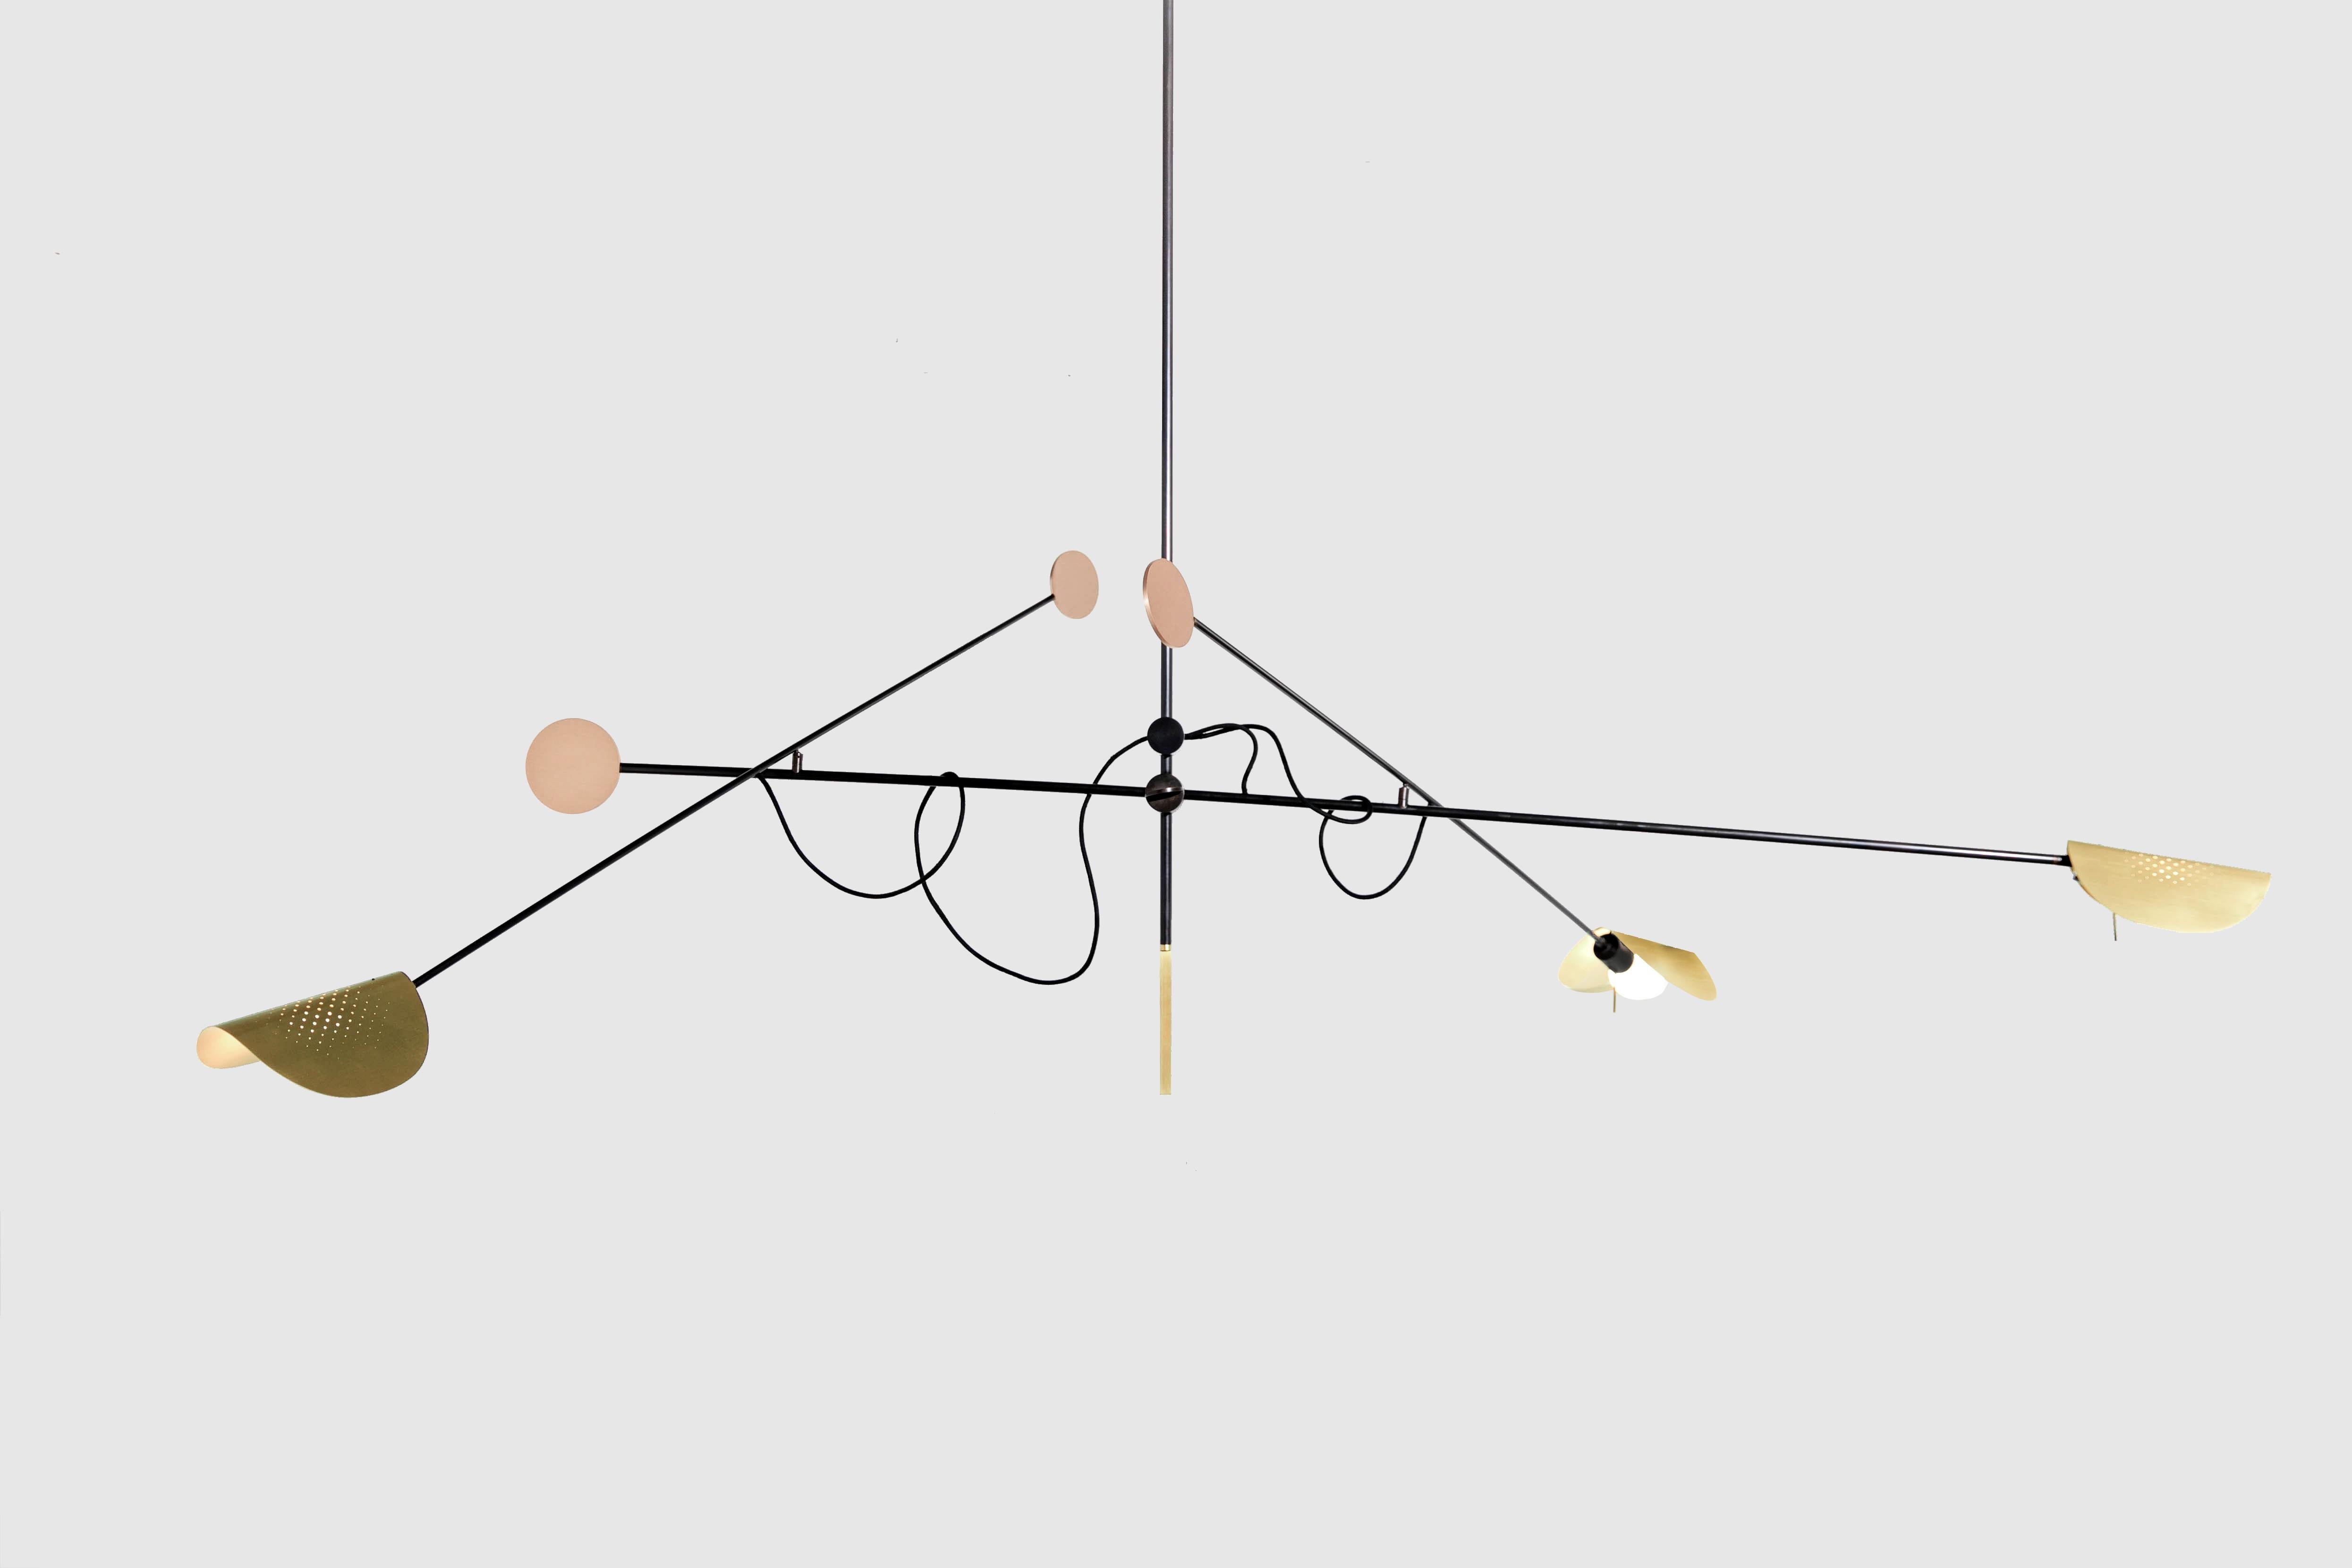 Moon chandelier by SB26
Dimensions: L 208 x W 128 x H 141 cm
Materials: Steel, copper, brass gilded with pure gold

Moon is balanced in space and refined to its worked ends which gives it bright and colorful reflections.
This reader plays also